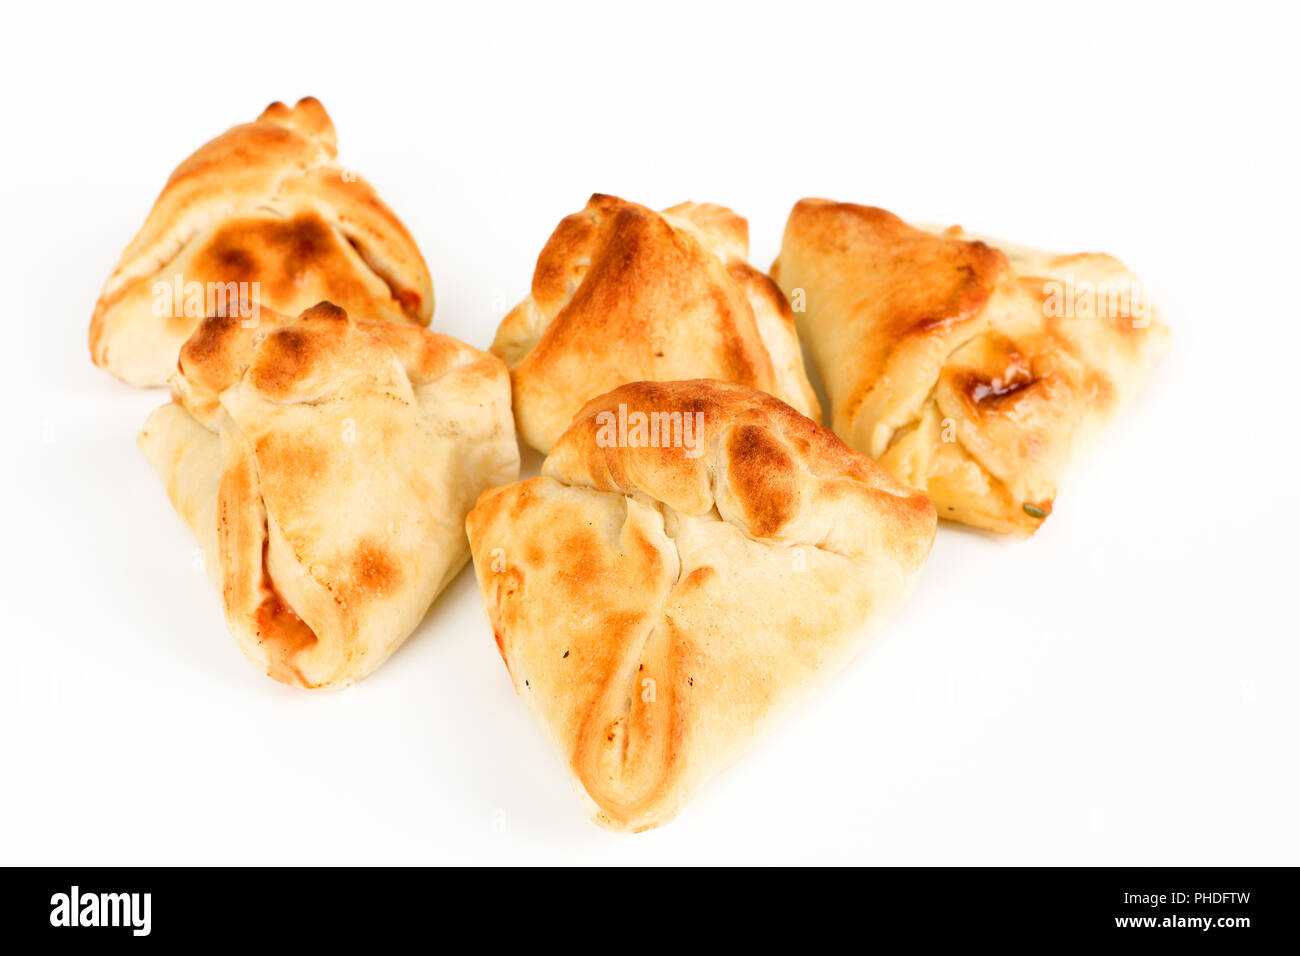 pizza rolls filled with cheese Stock Photo